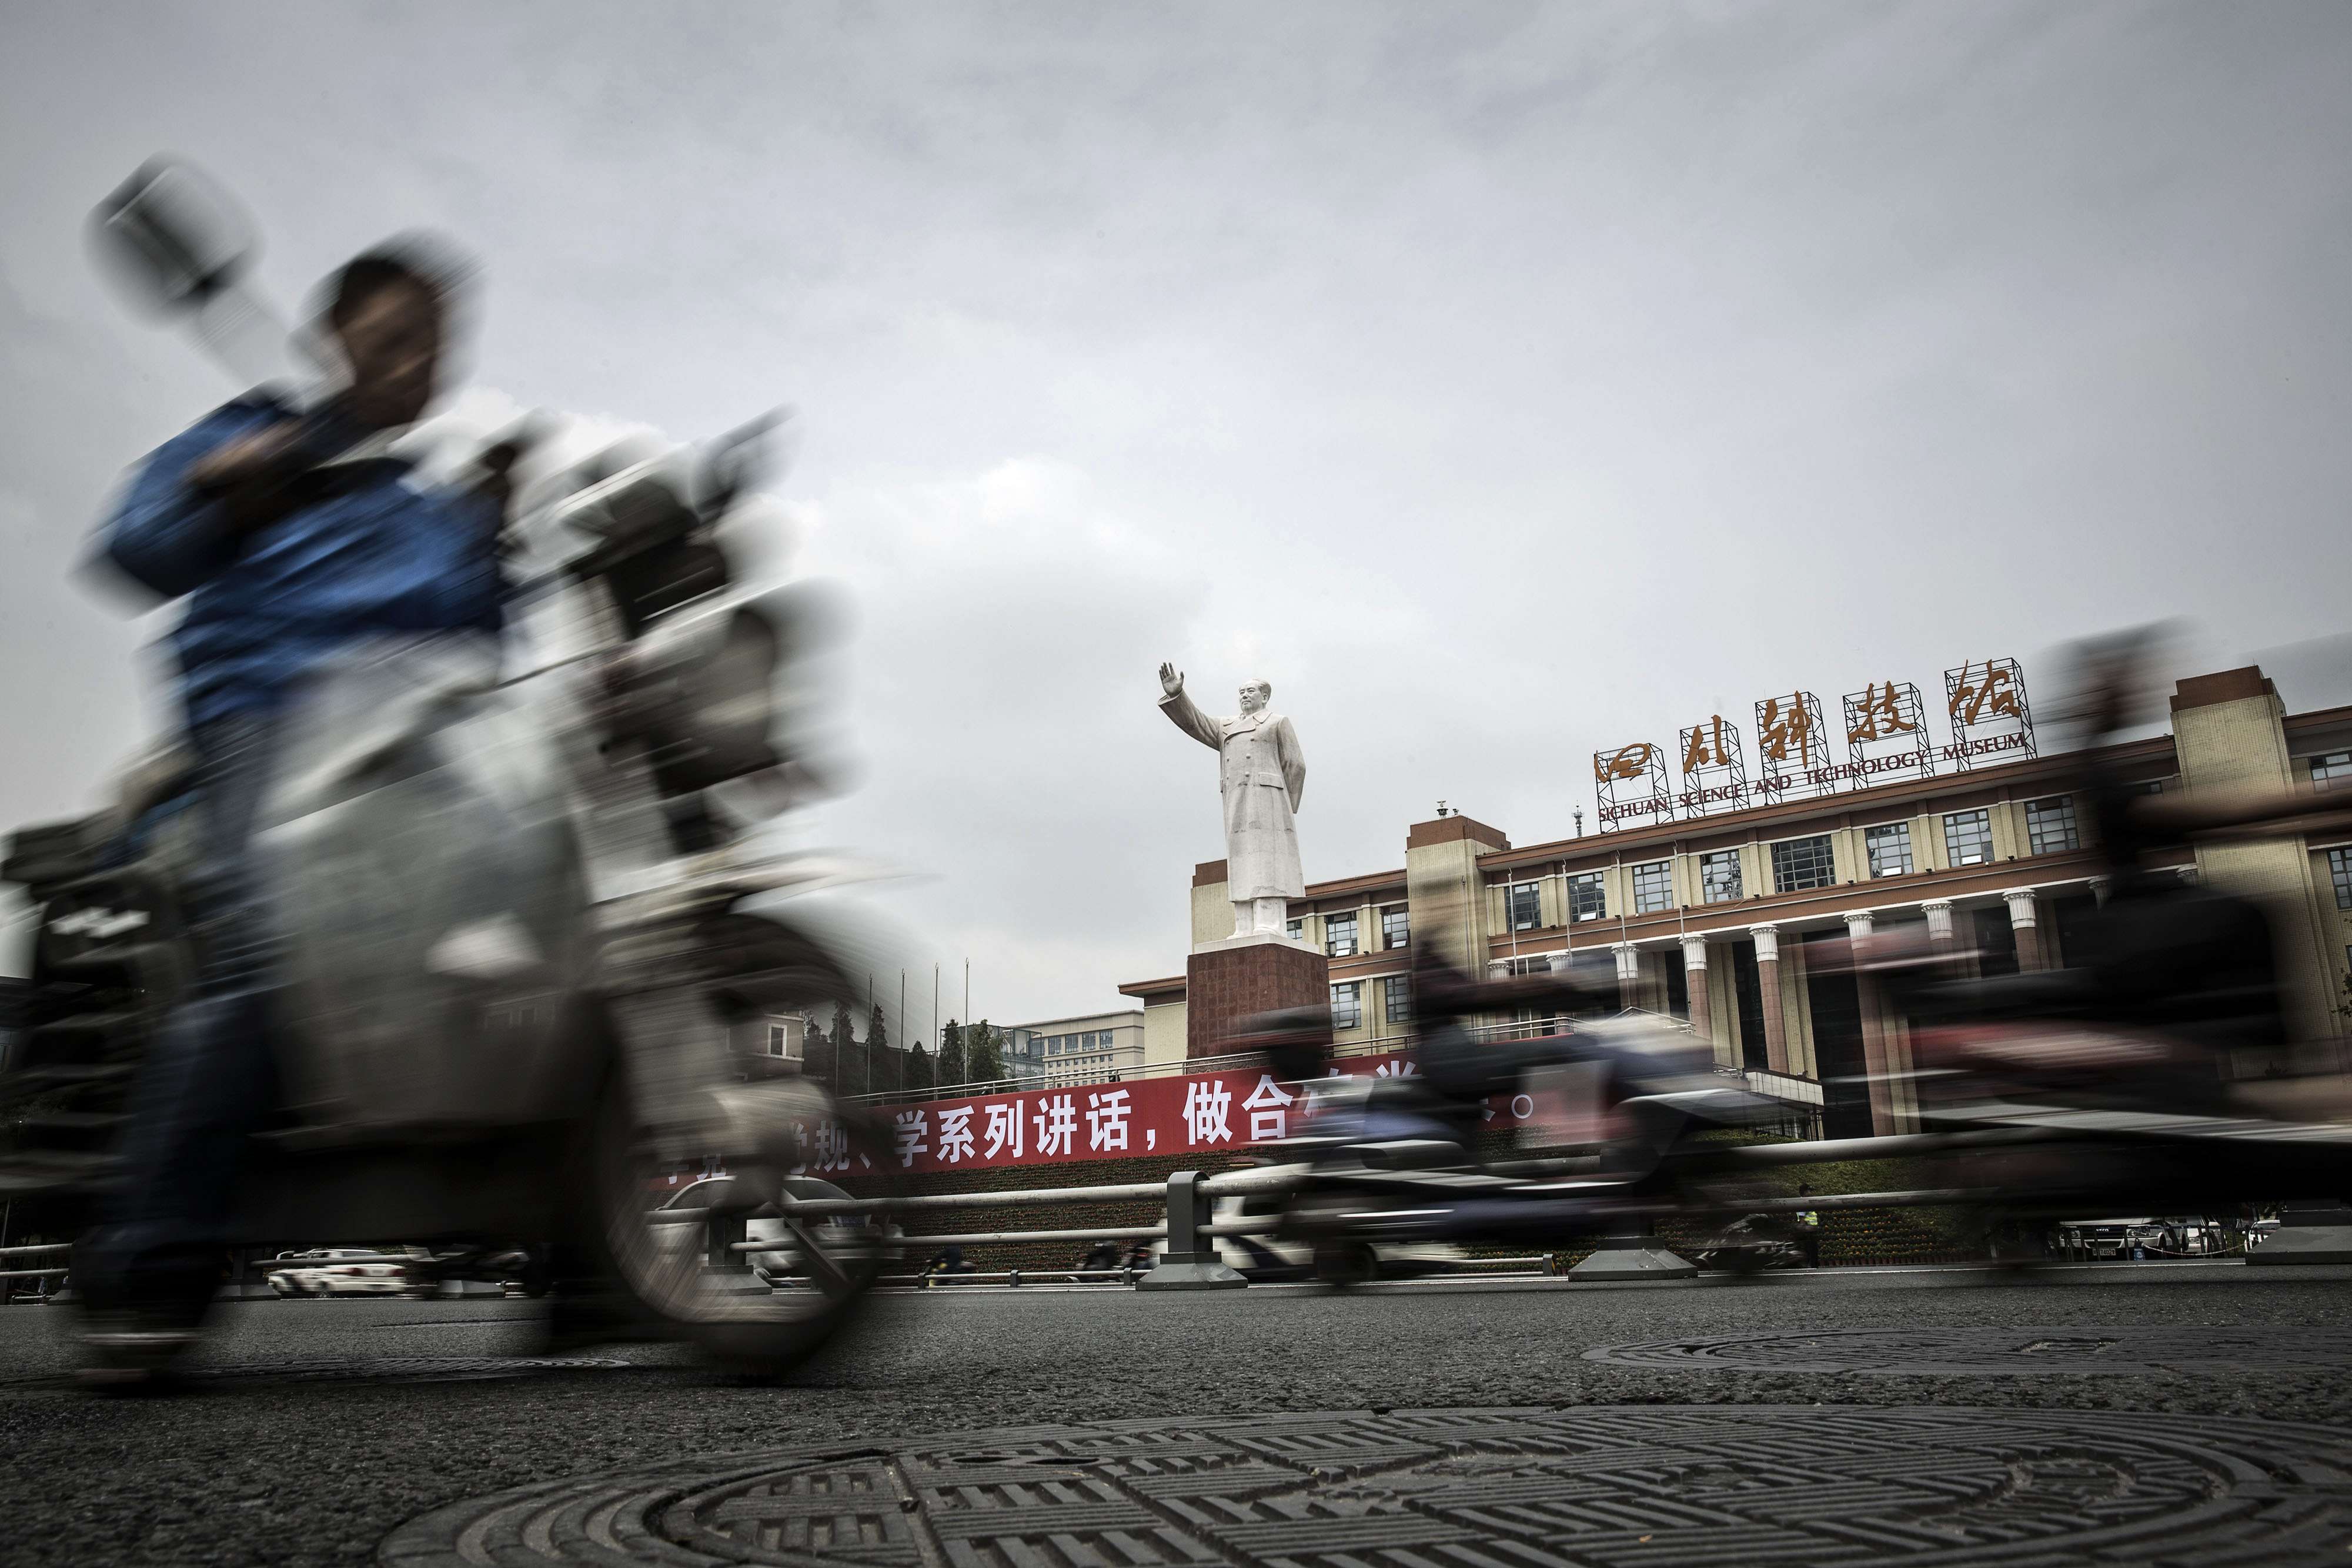 Motorcyclists ride past a statue of Mao Zedong in front of the Sichuan Science and Technology Museum in Chengdu. China’s instinctive response to pressures from net capital outflows, volatile stock markets and imbalances caused by export-led growth is more market intervention. Photo: Bloomberg